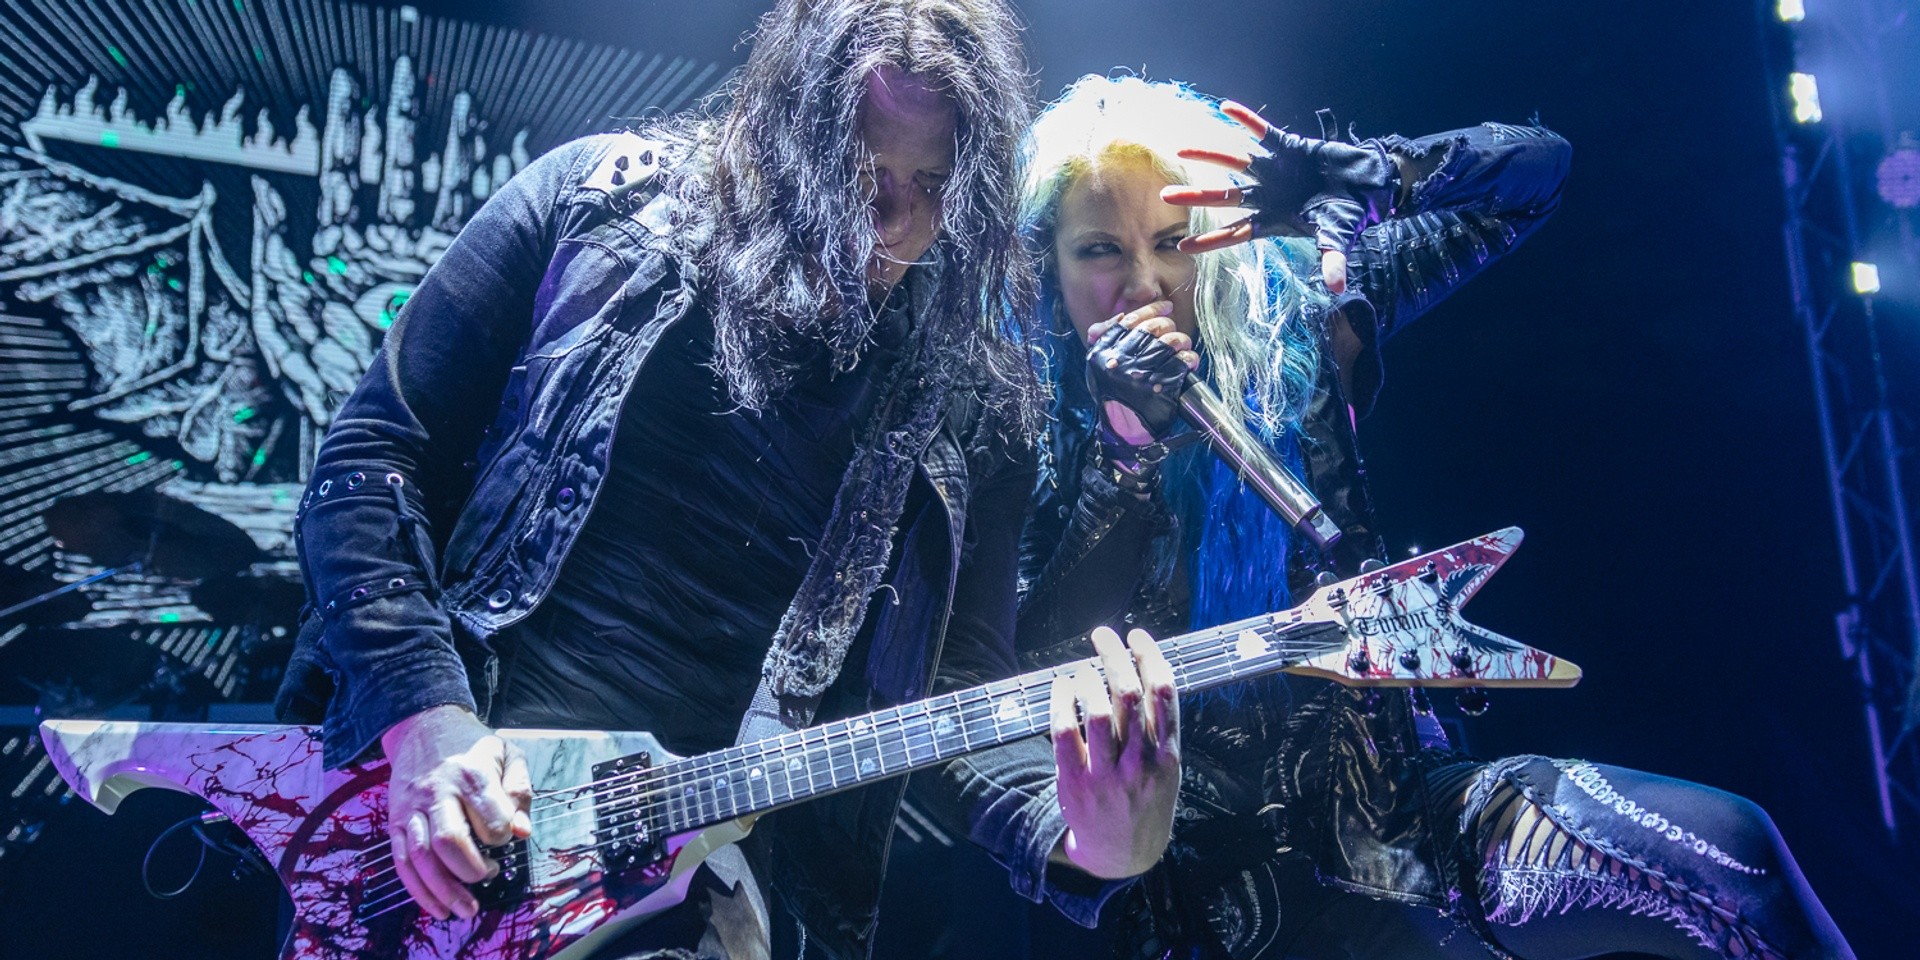 Arch Enemy gave everything they had at sold out show in Singapore – gig report